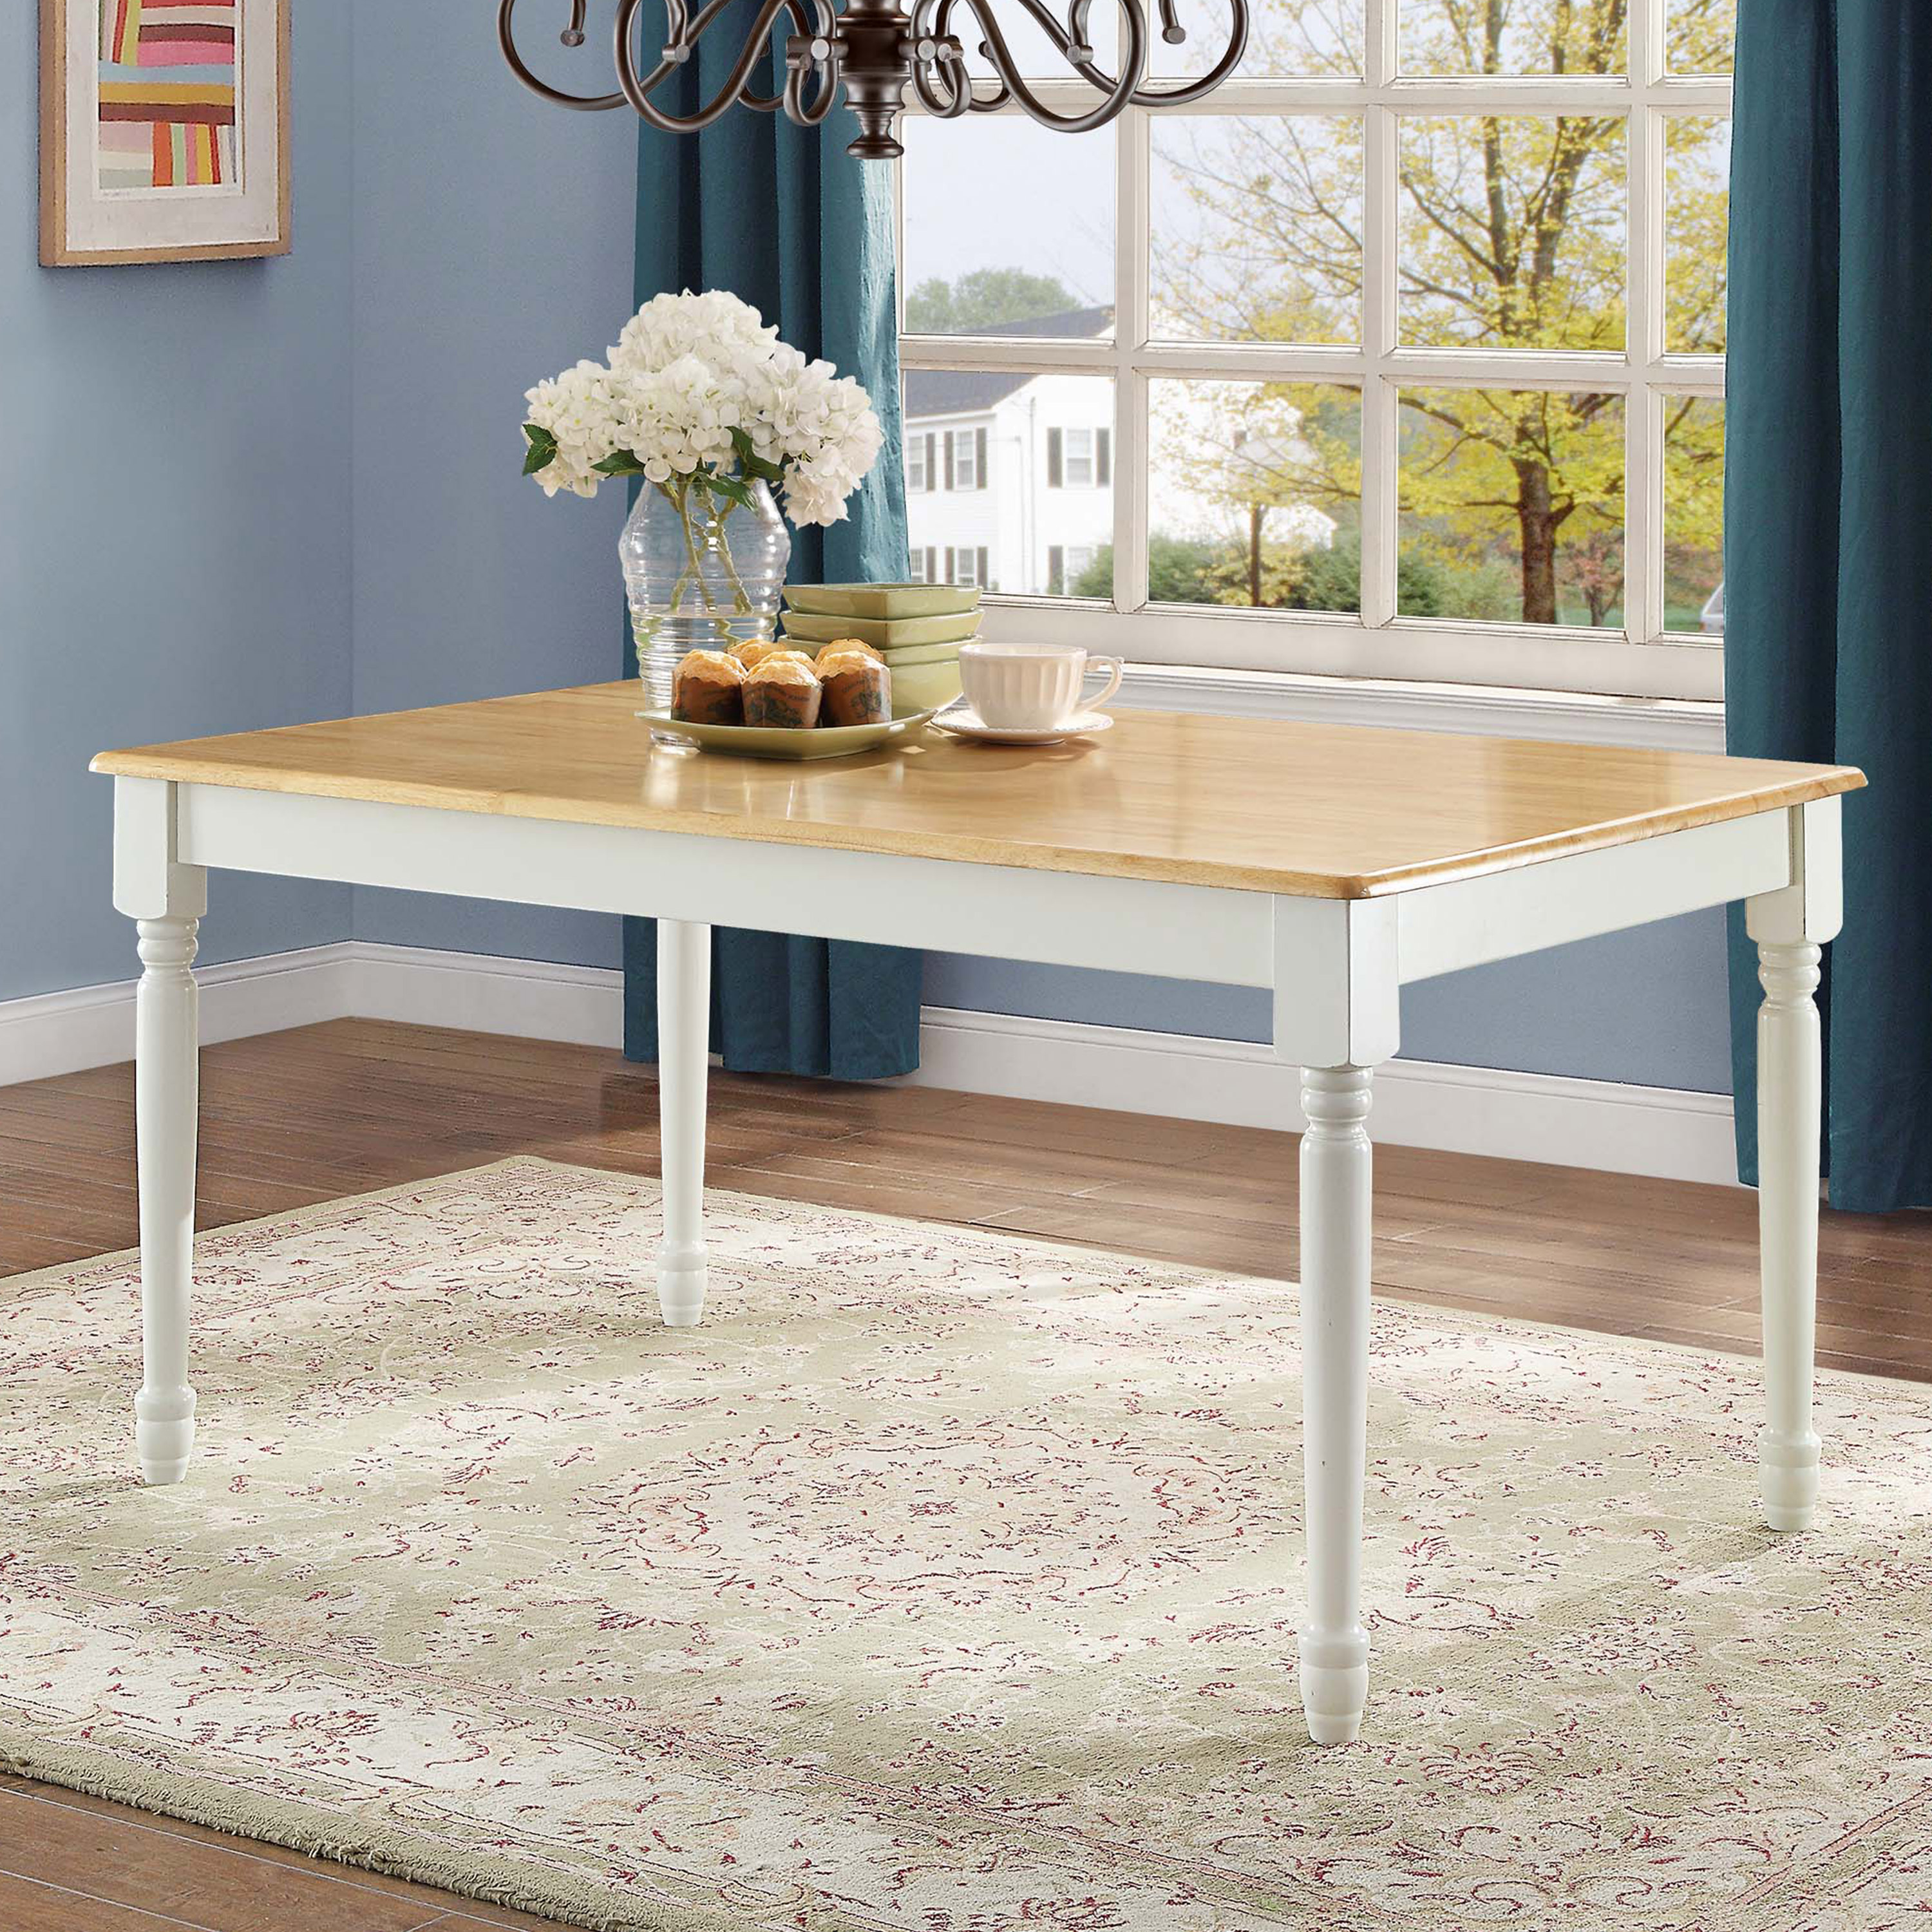 Better Homes and Gardens Autumn Lane Farmhouse Dining Table, White and Natural (Table only) - image 1 of 9